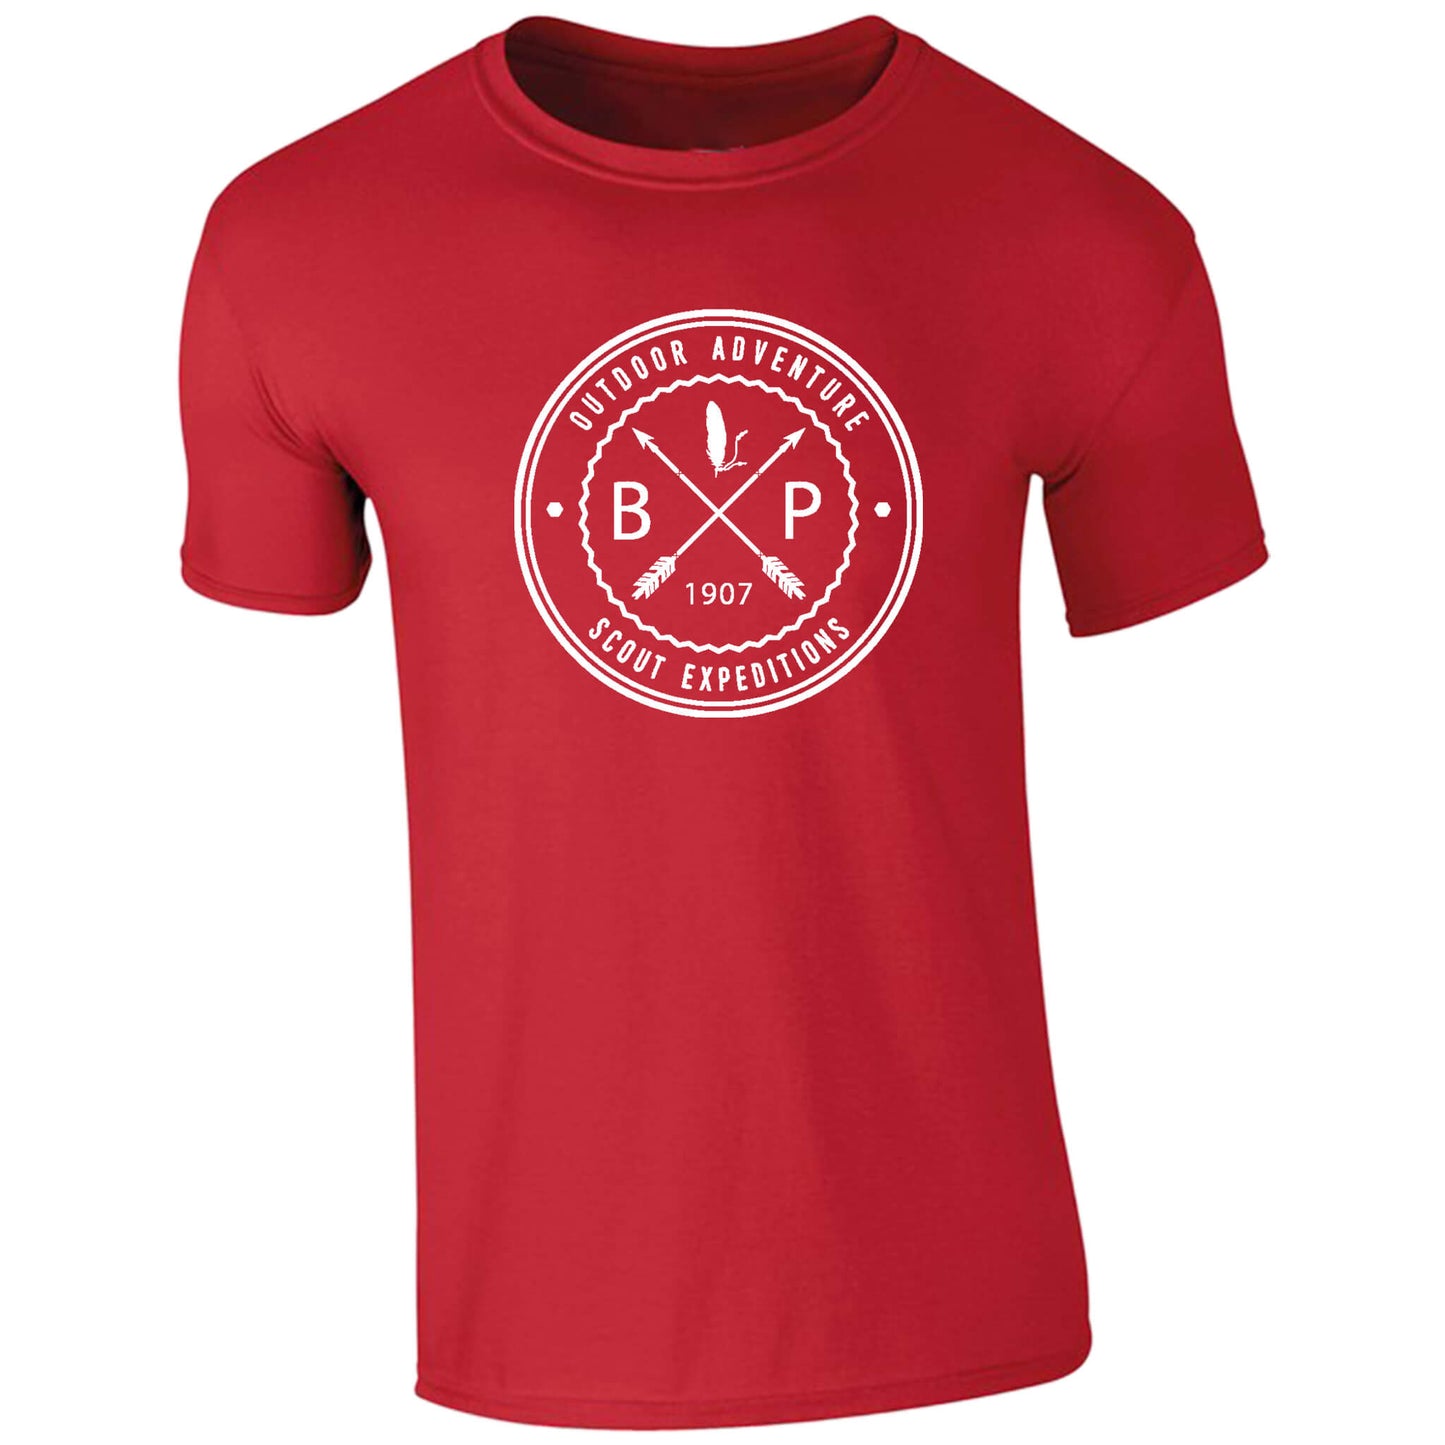 Bp Scouting Expeditions Since 1907 Youth T-Shirt